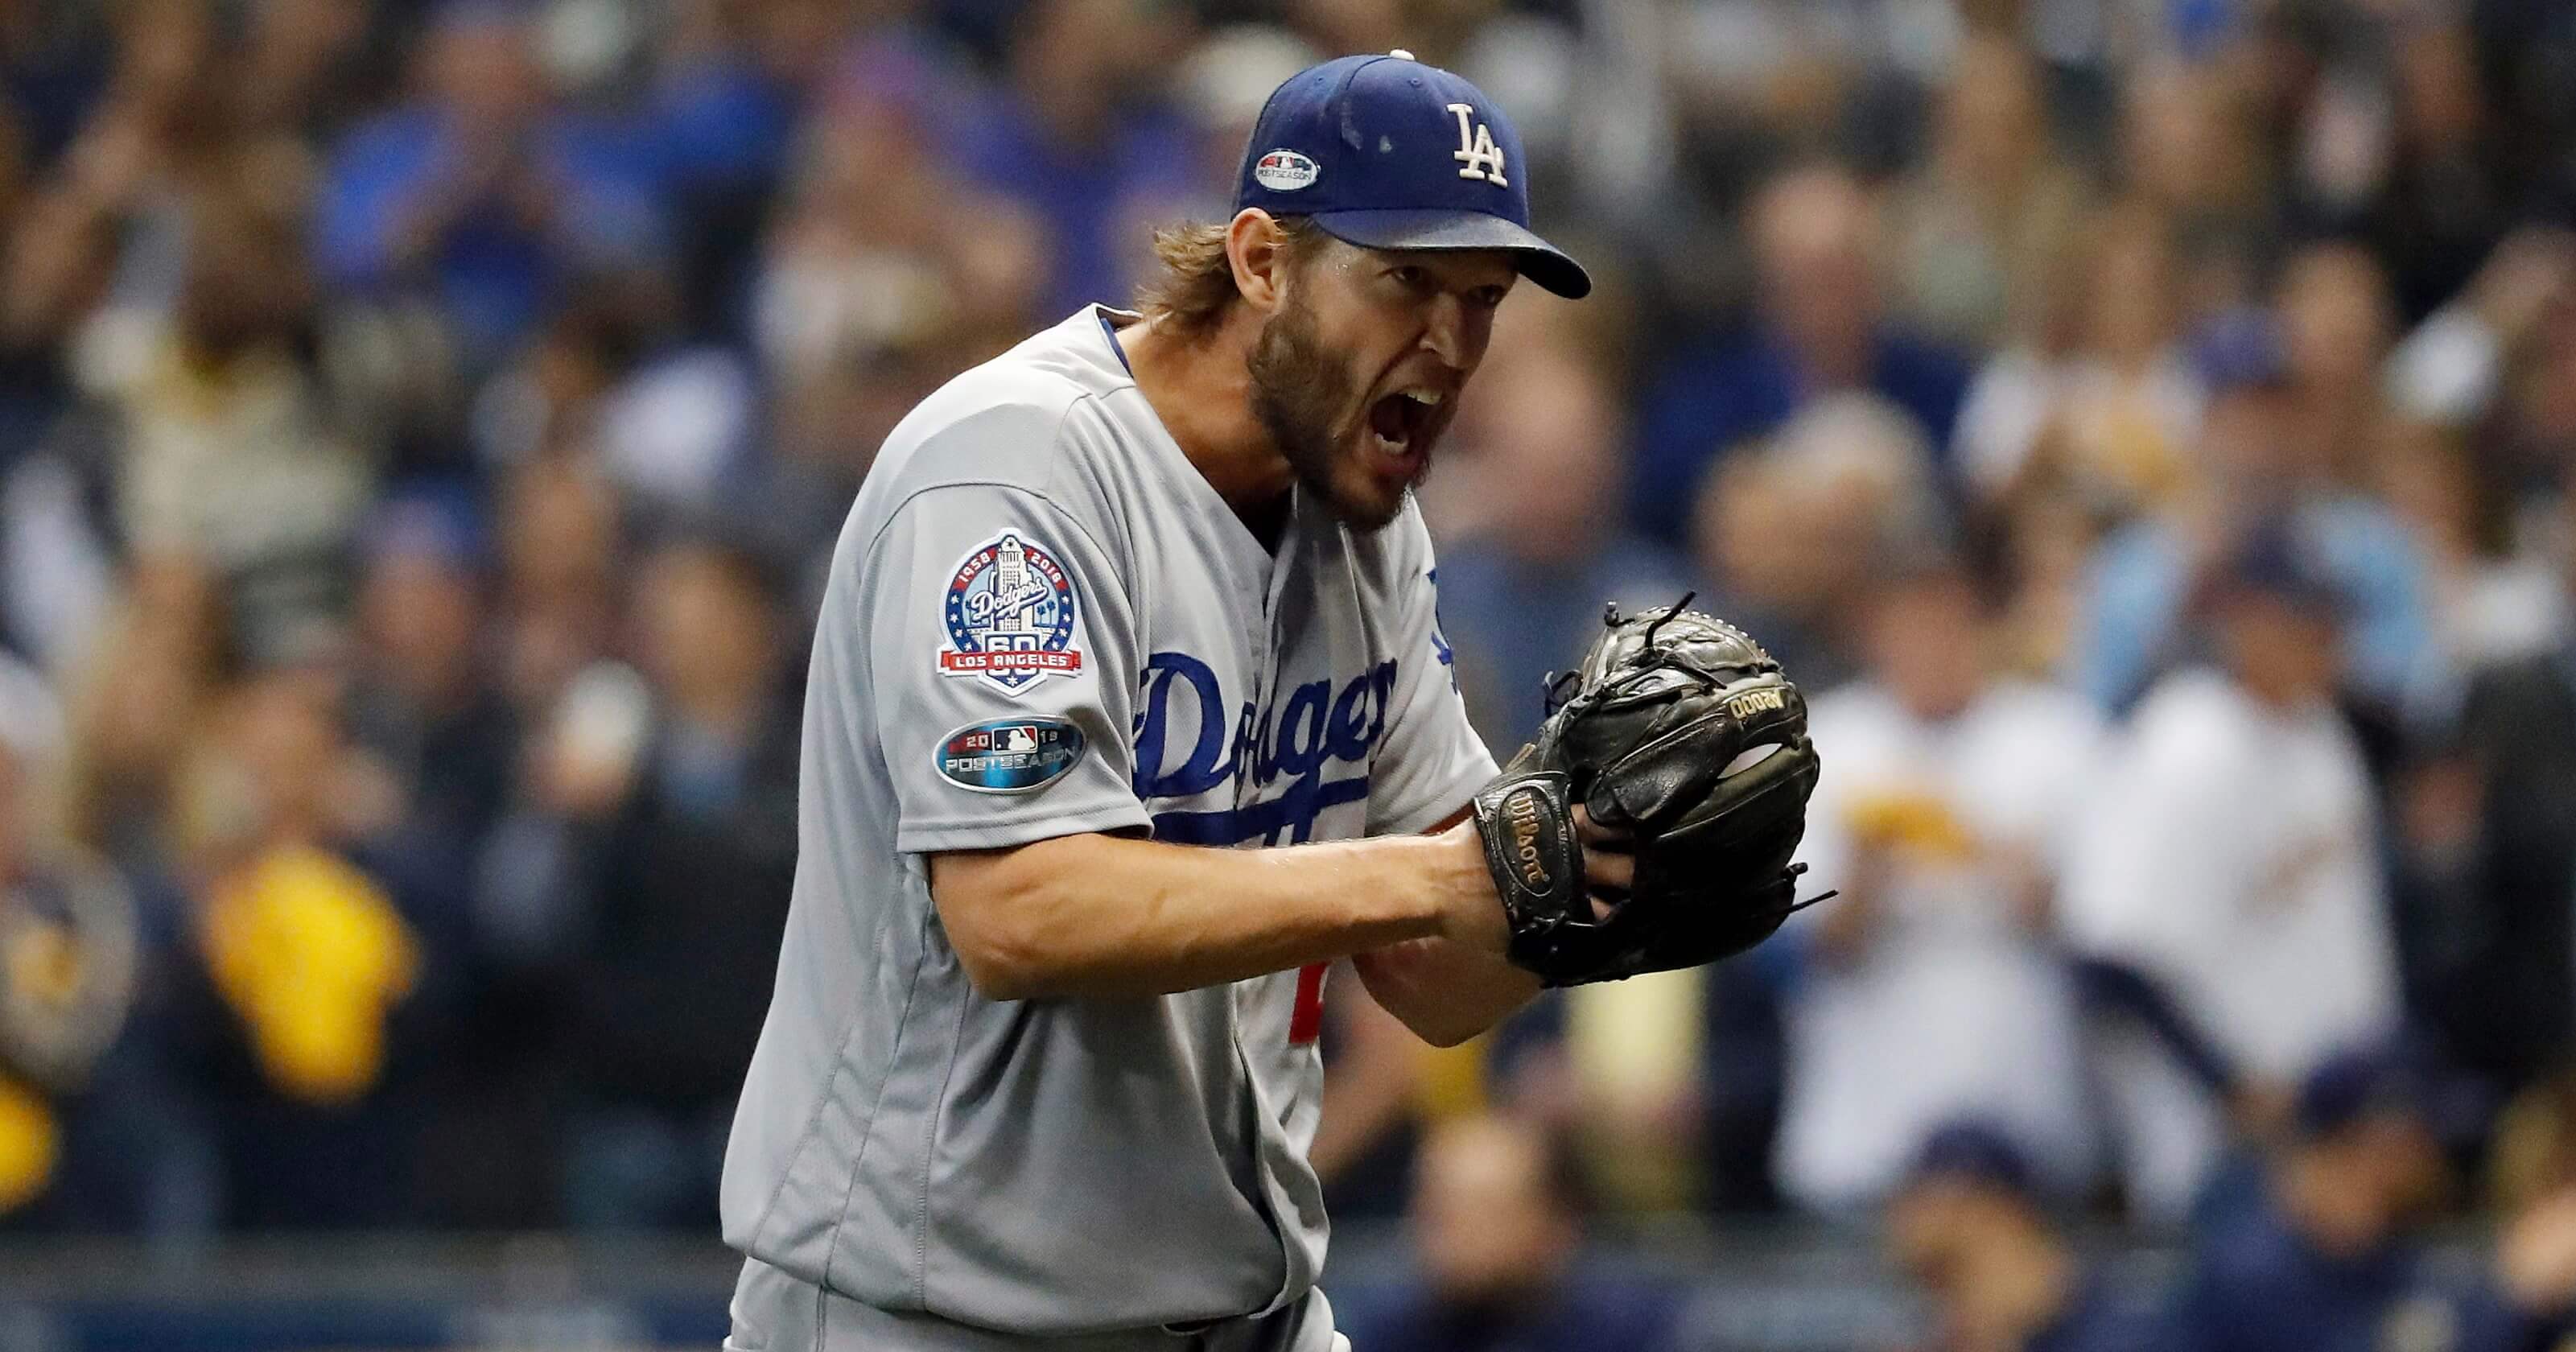 Los Angeles Dodgers starting pitcher Clayton Kershaw yells as he walks off after the third inning of Game 1 of the National League Championship Series game against the Milwaukee Brewers on Friday.